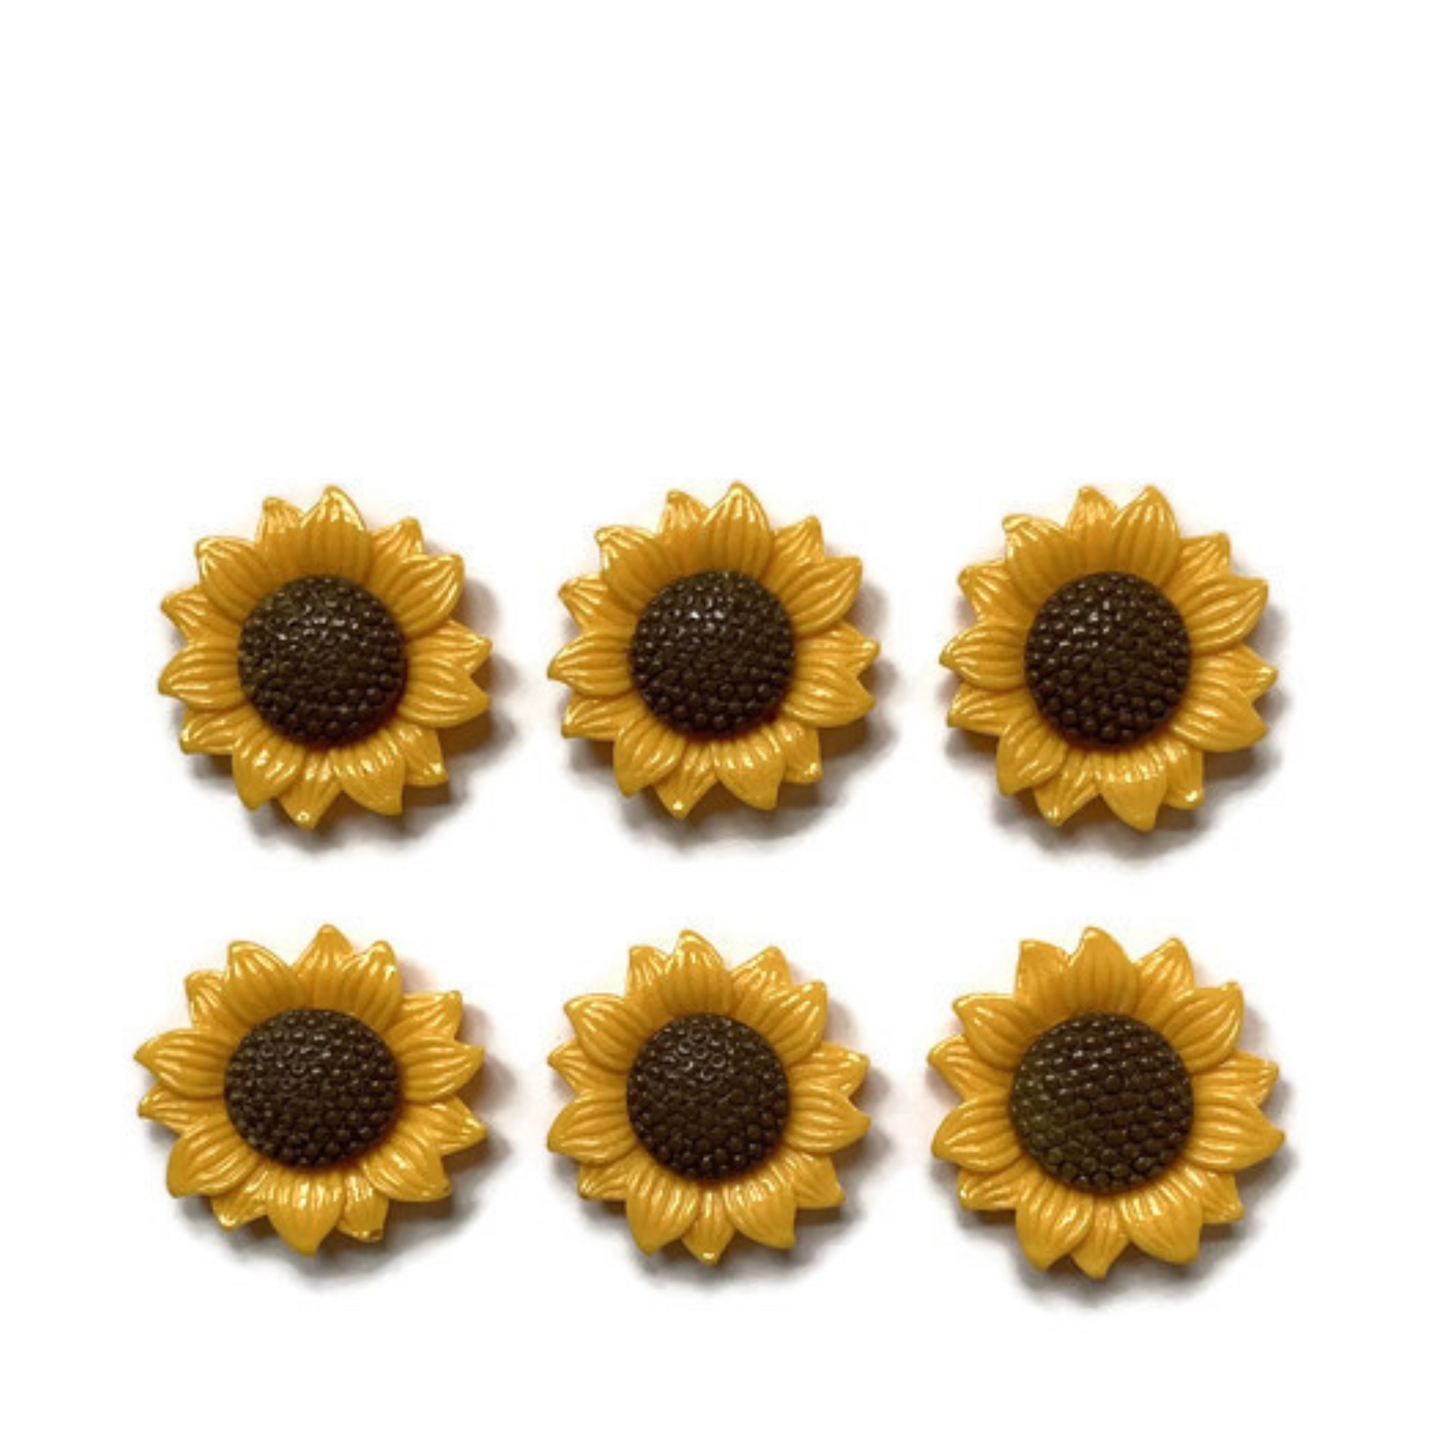 Small Sunflower Magnets